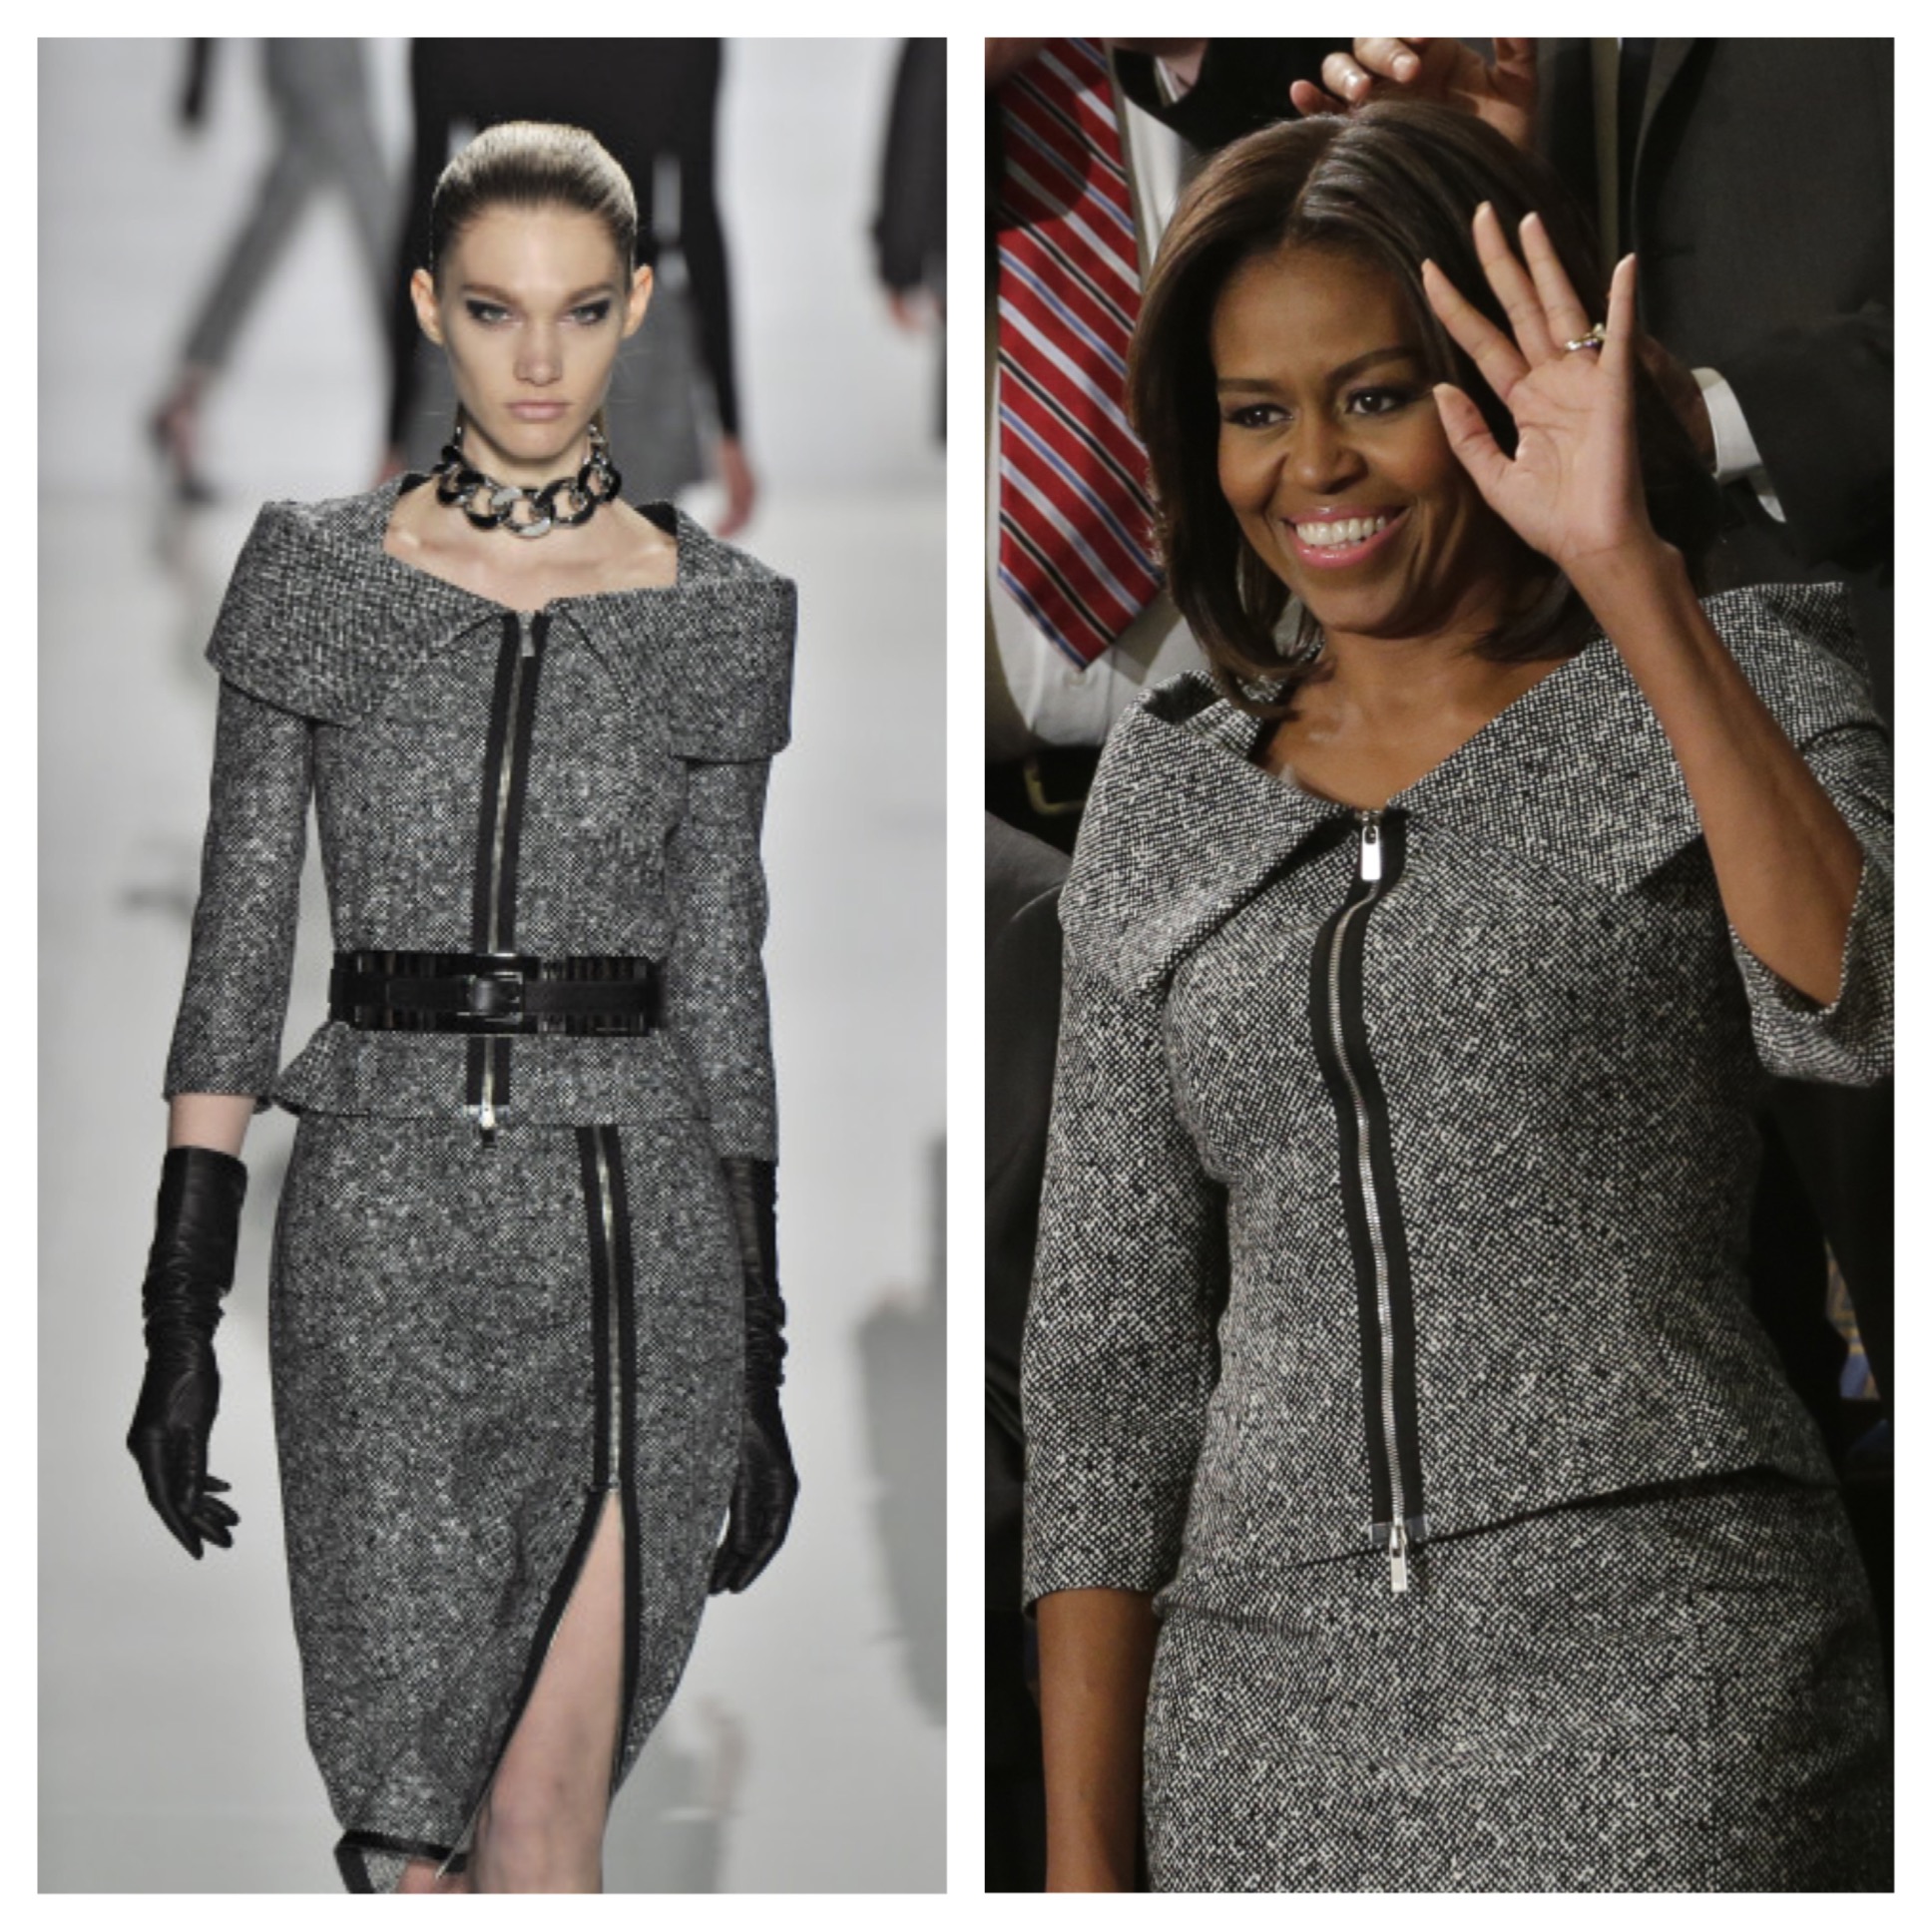 First Lady Michelle Obama Rocks Her State of the Union Look